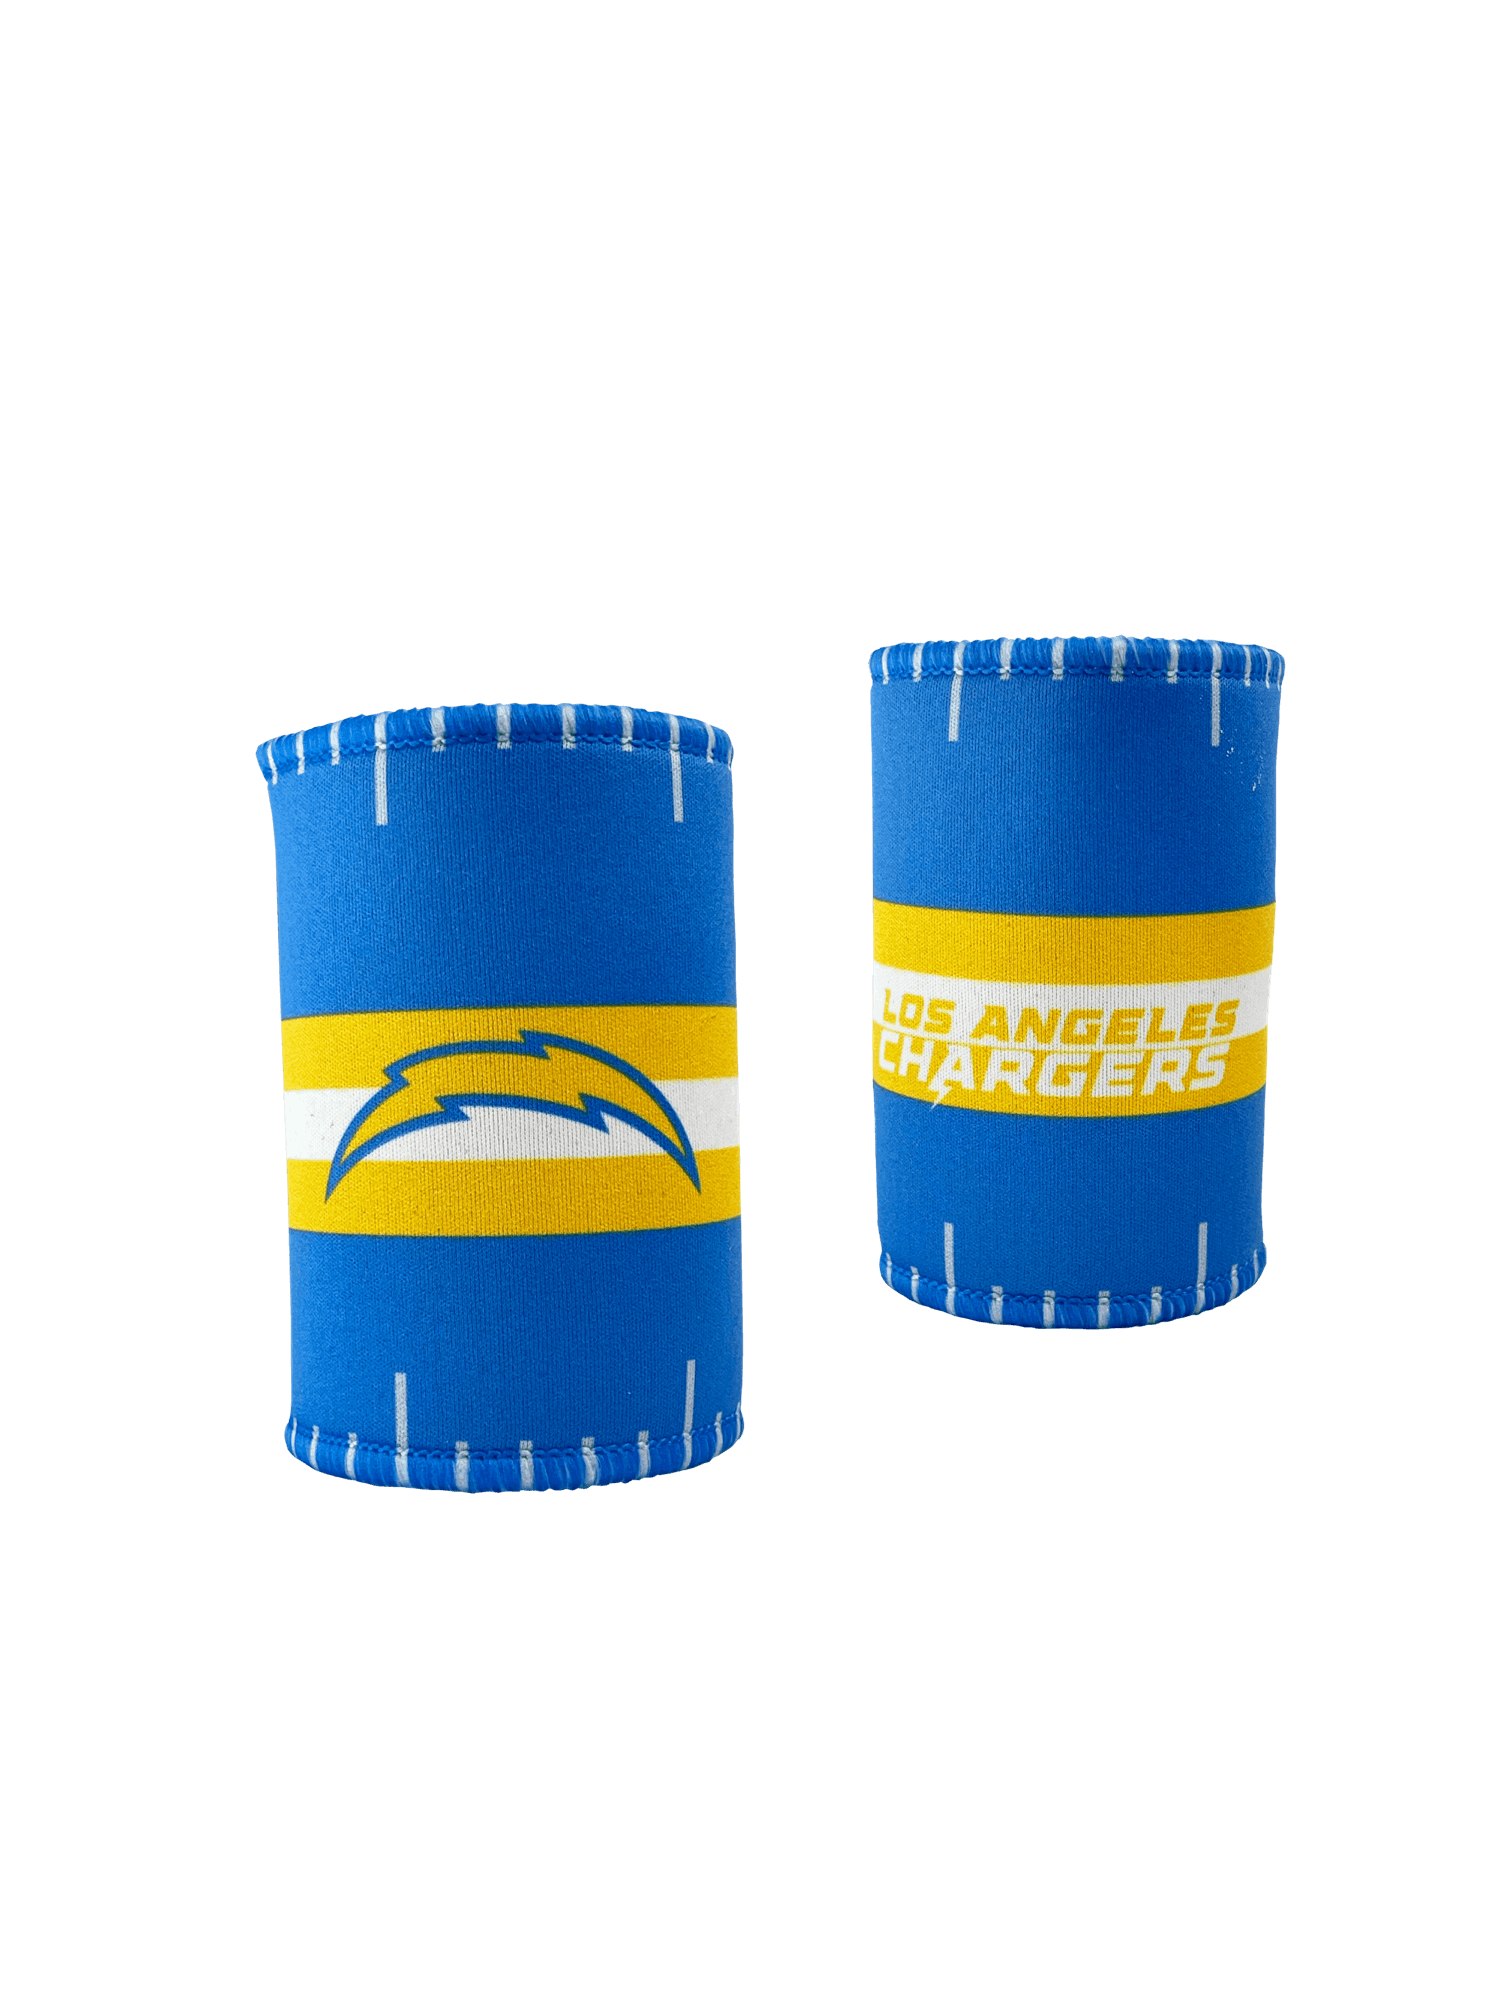 STUBBY HOLDER_LOS ANGLES CHARGERS_STUBBY CLUB